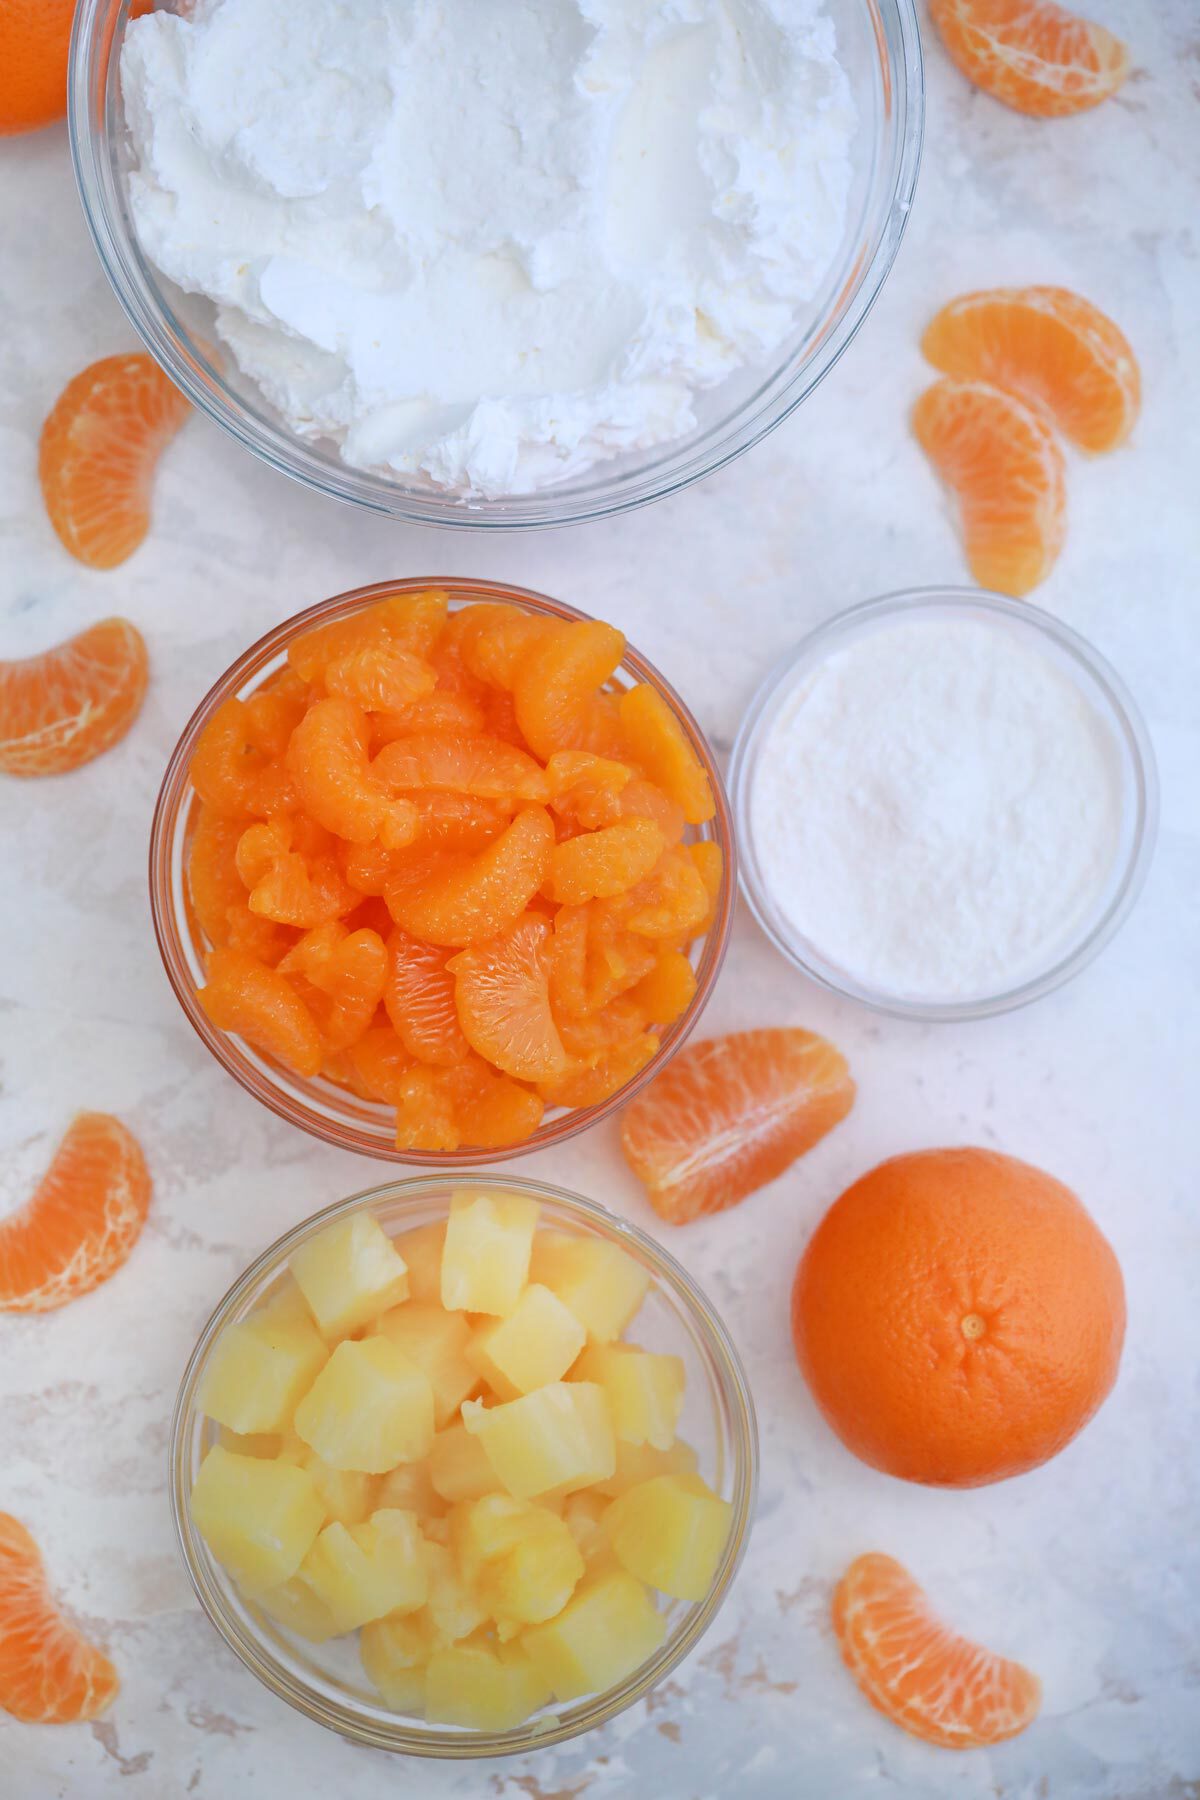 Ingredients for mandarin orange salad in glass bowls on marbled counter